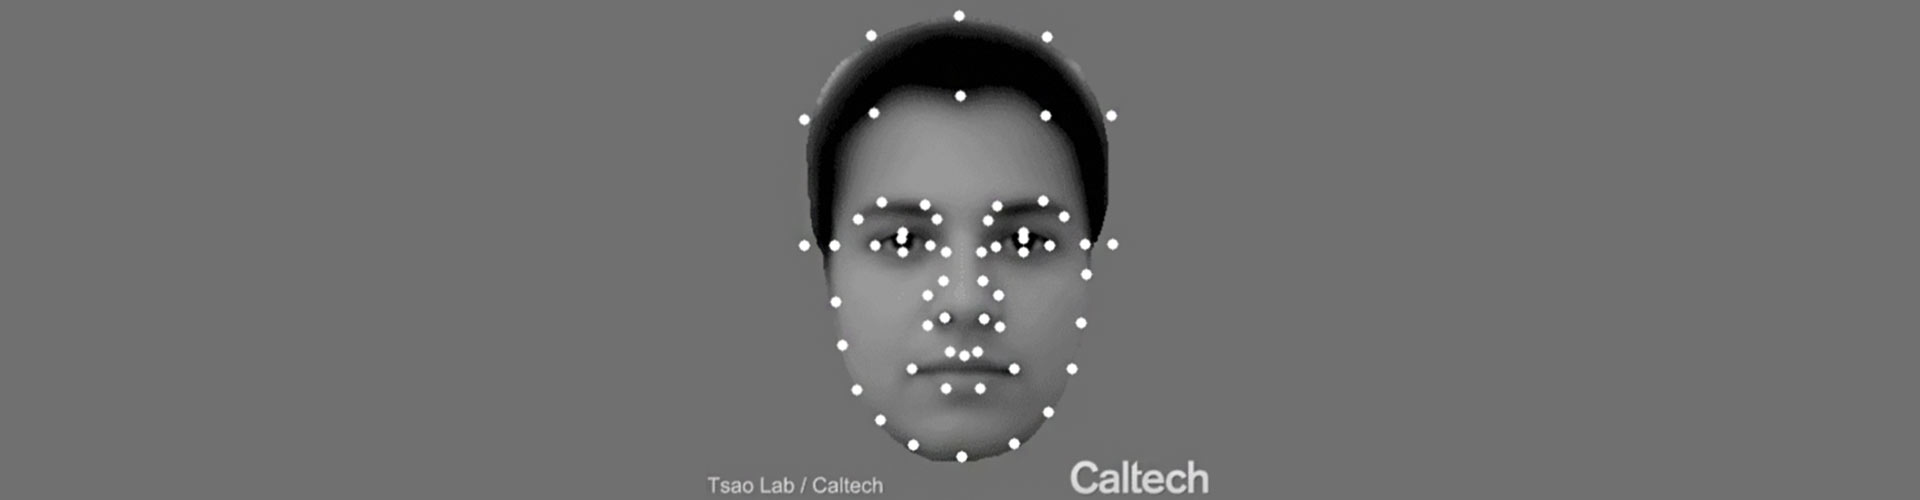 Caltech Research: Cracking the Code of Facial Recognition